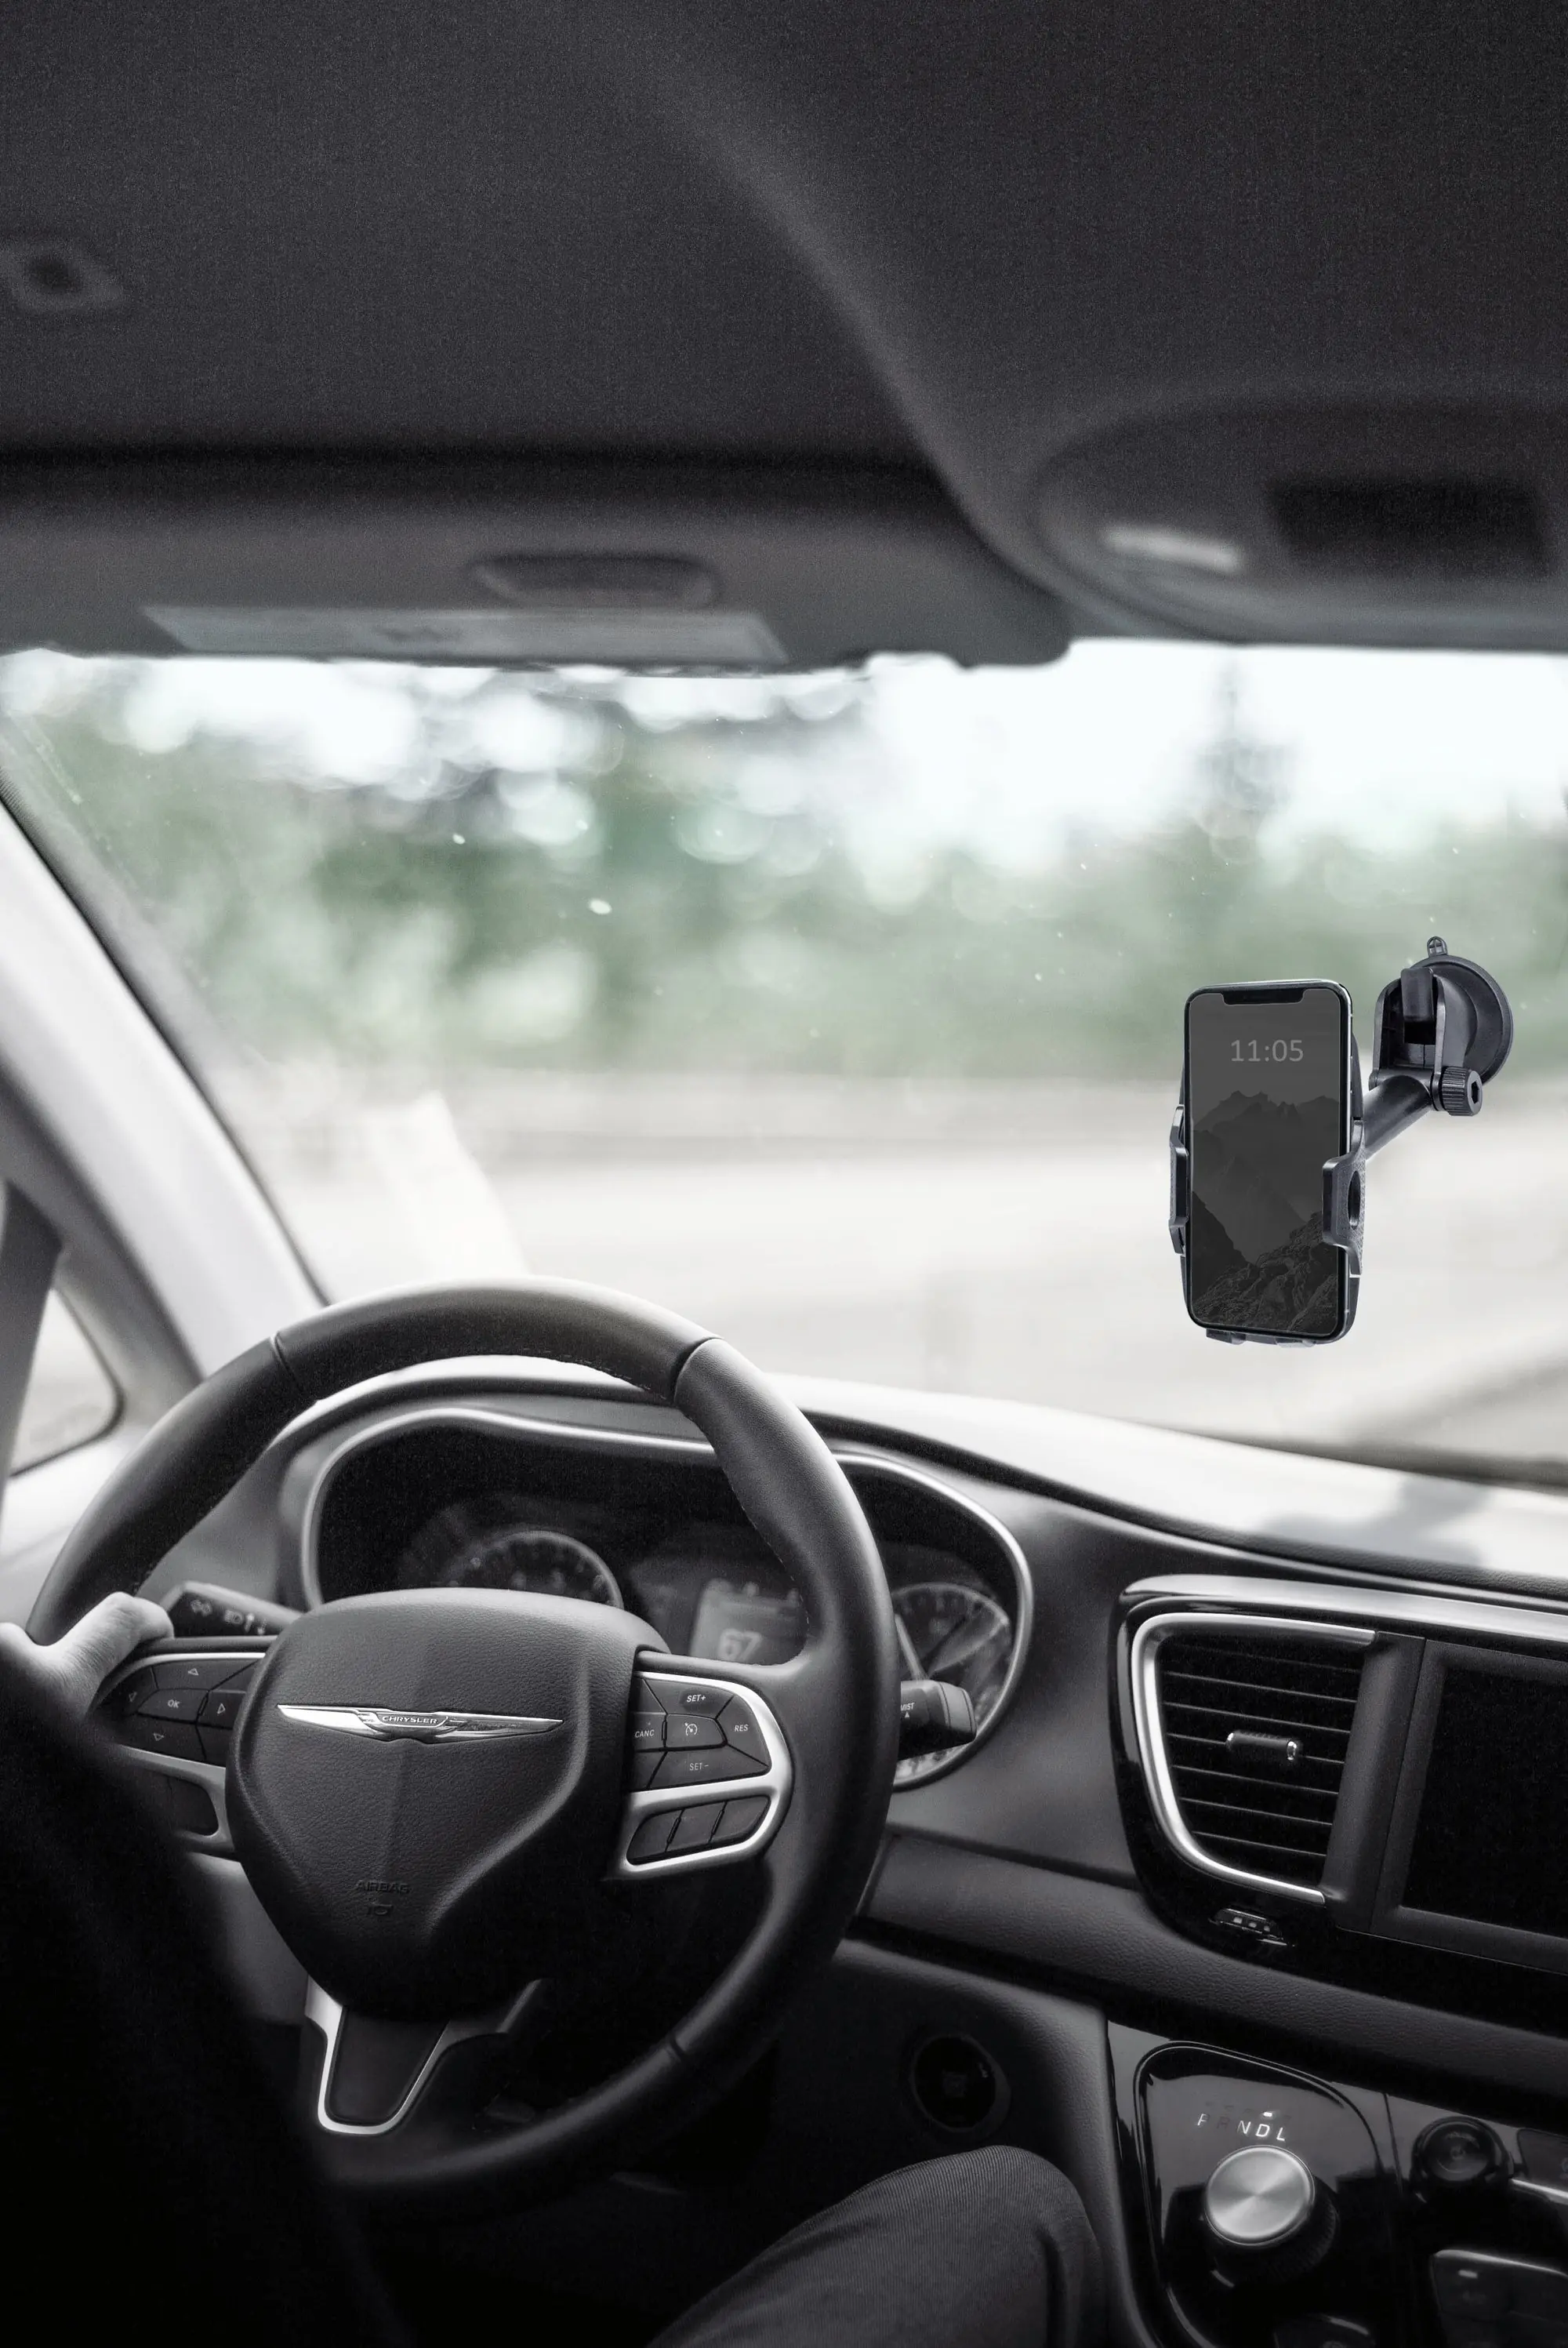 How to Install and Use the Adreama Universal Car Mount for Hassle-Free Driving